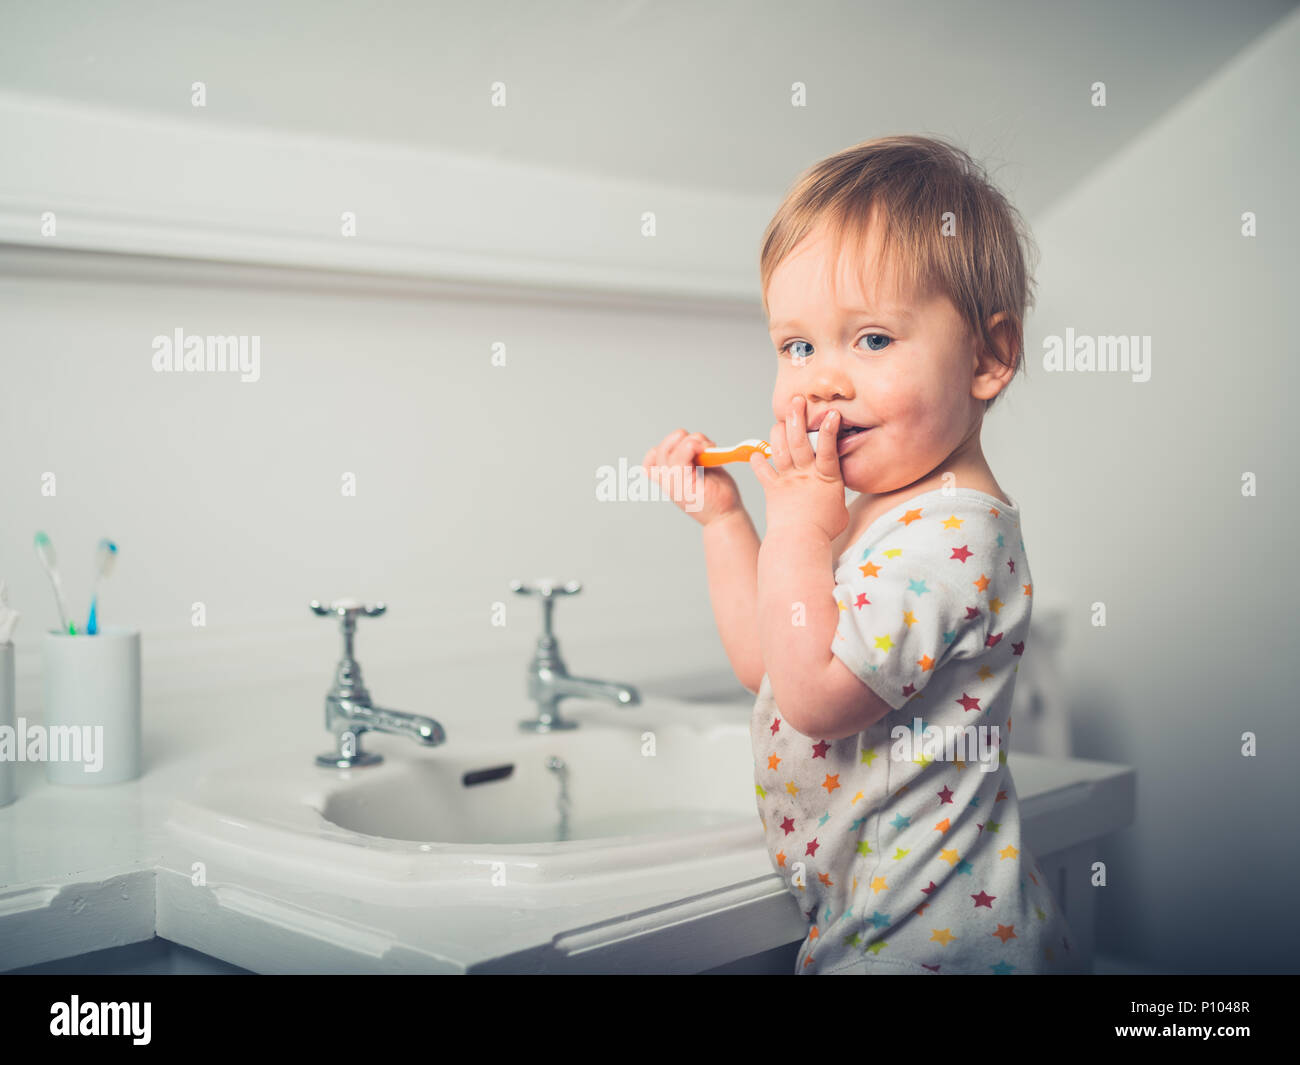 A cute little boy is brushing his teeth by the sink in a bathroom Stock Photo